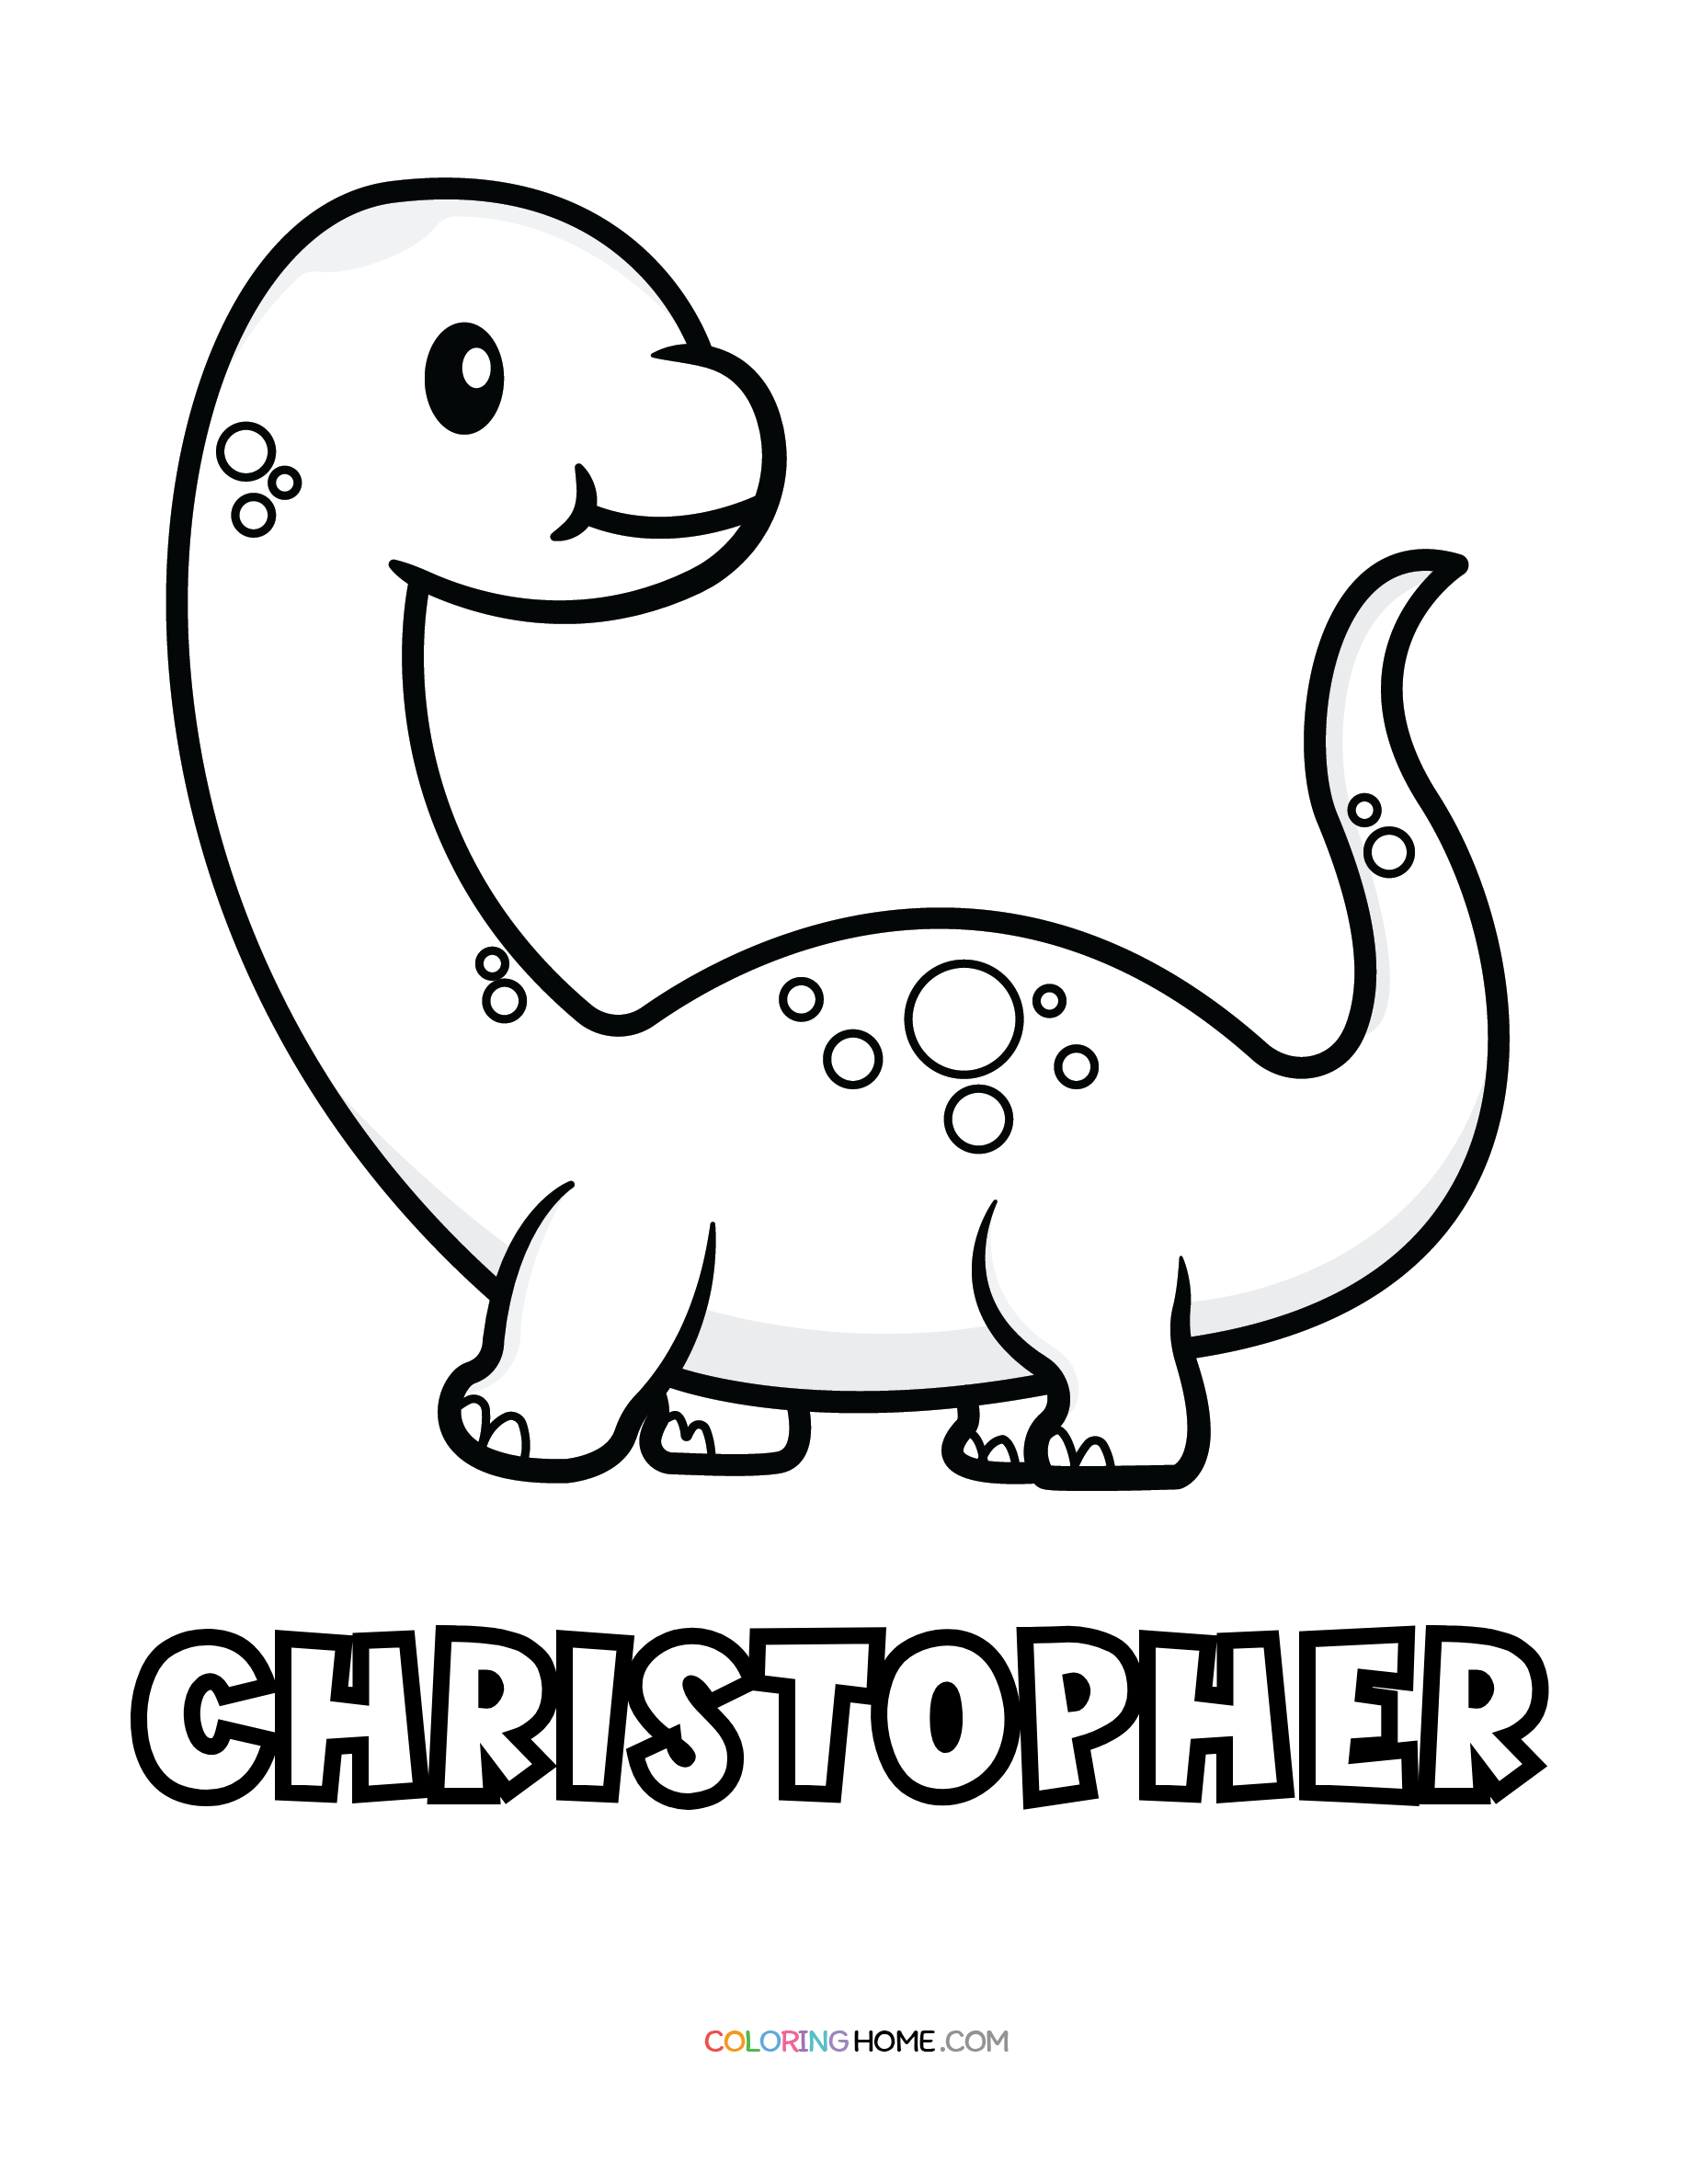 Christopher dinosaur coloring page